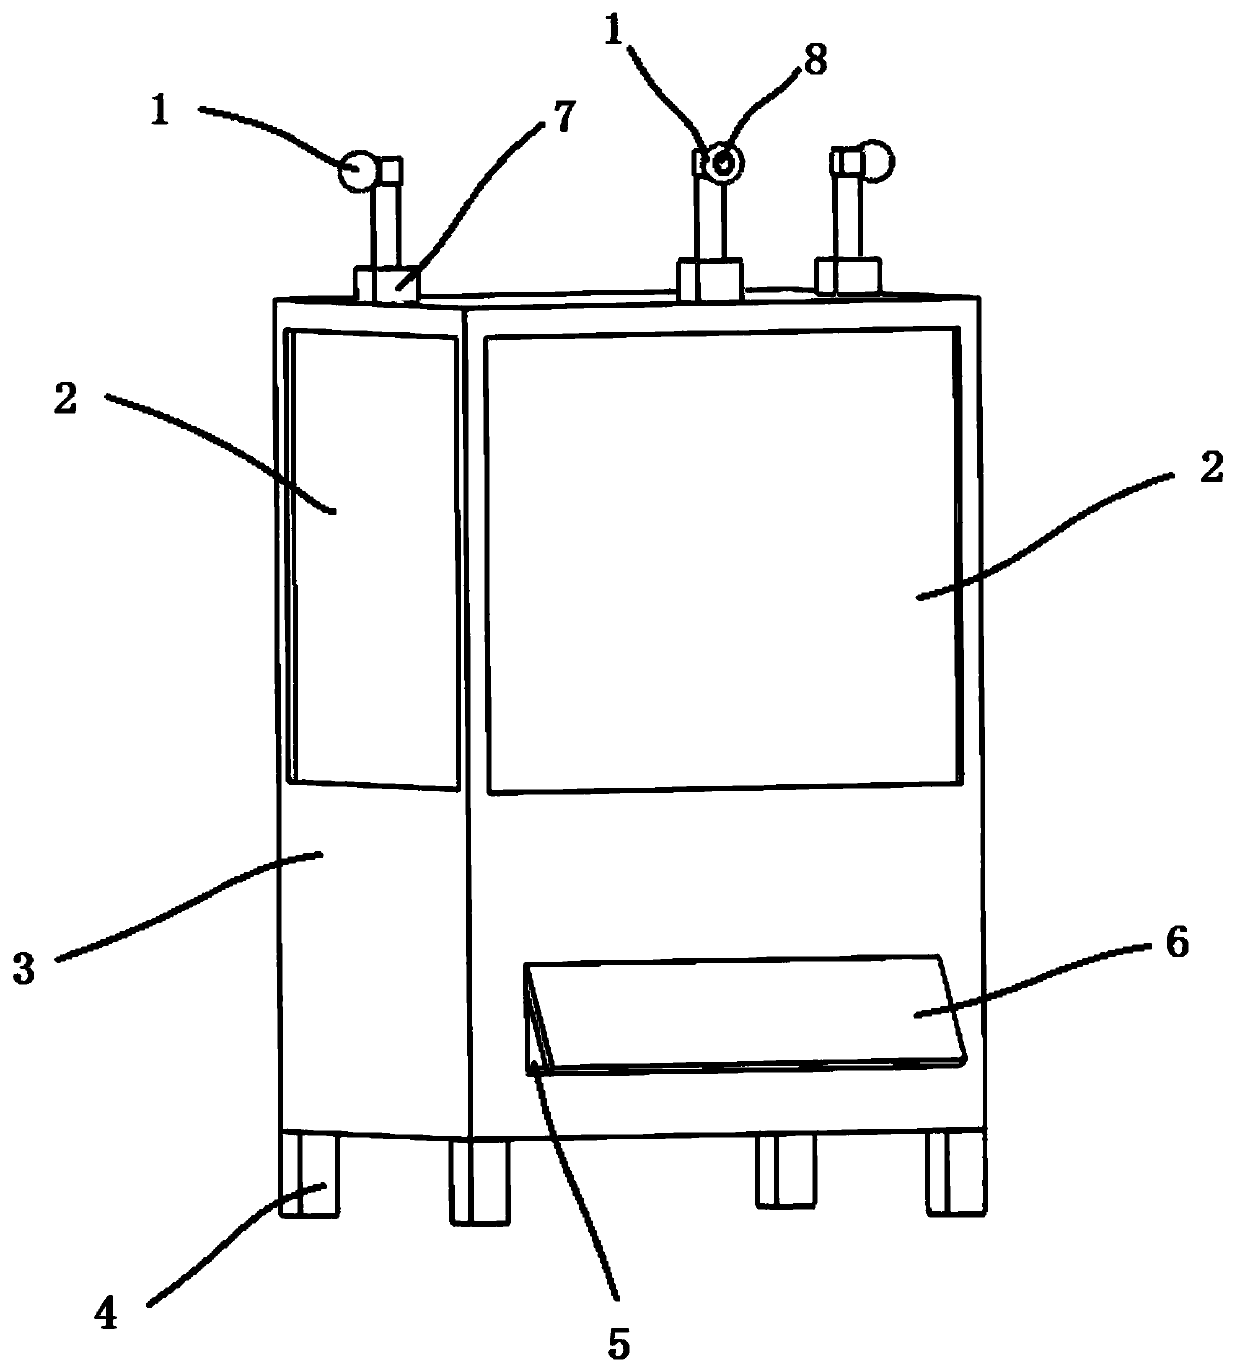 Pharmaceutical self-service vending system and method based on face recognition